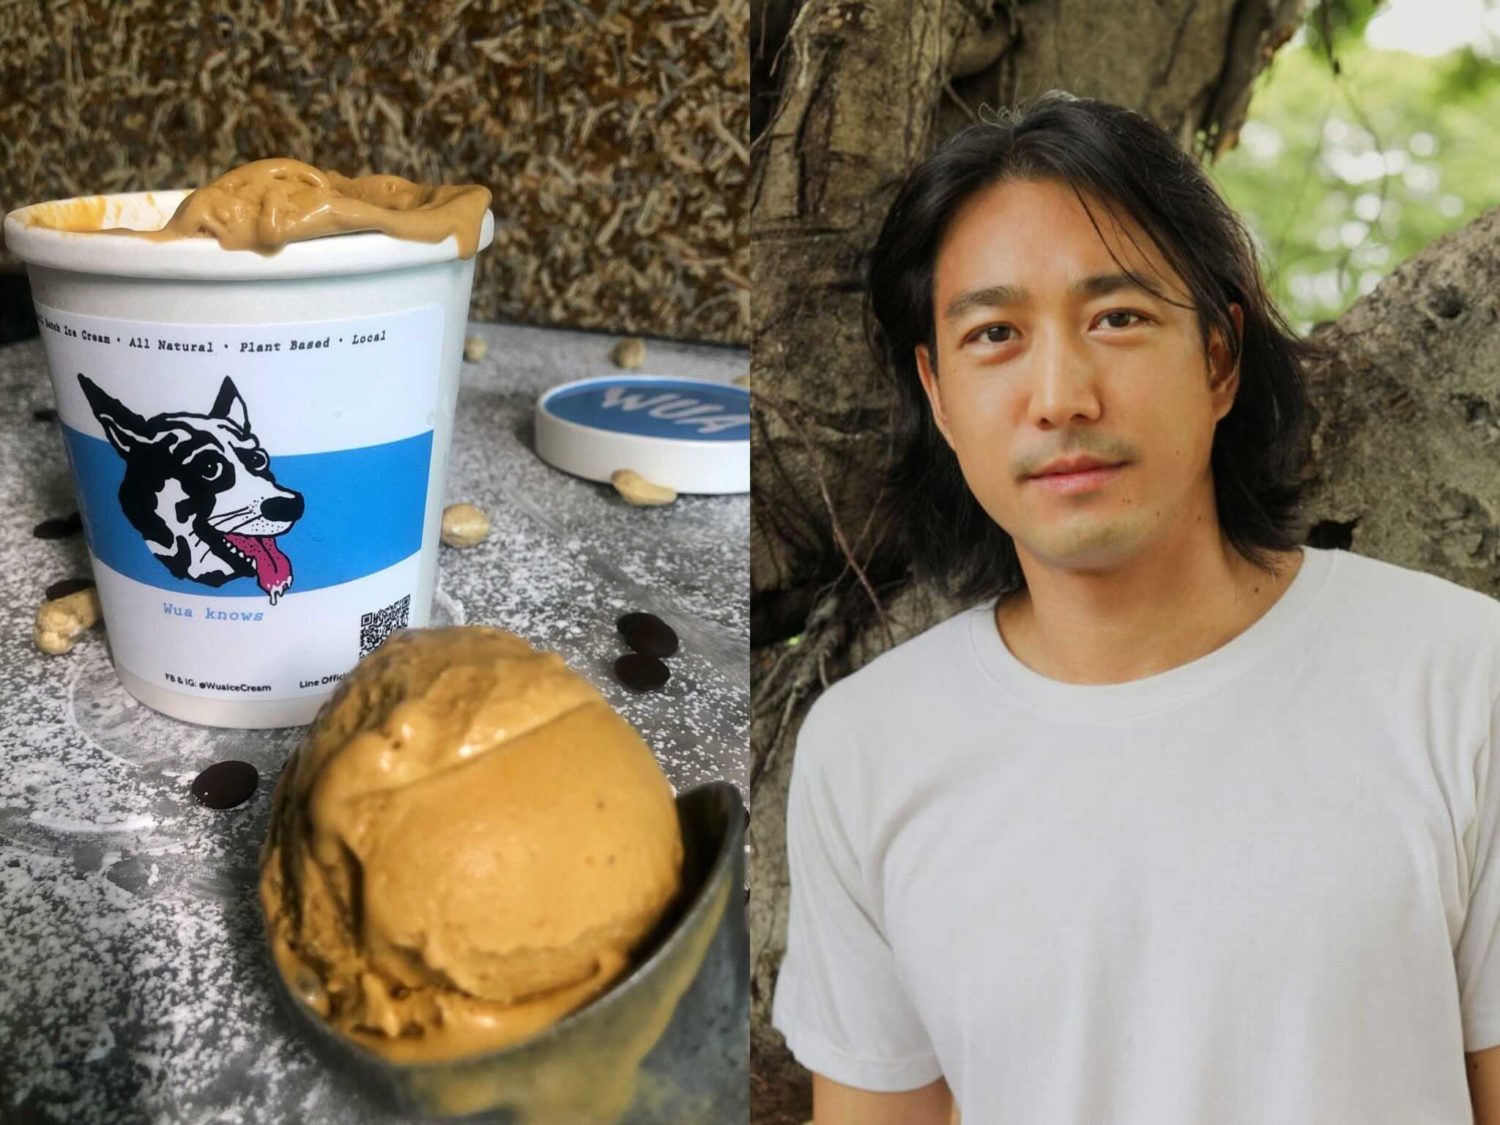 A pint of ‘Wua’ salted caramel ice cream made, at left, and its maker, Jam owner Dhyan Ho, at right. Photos: Napanarit Savantrach, Dogherine